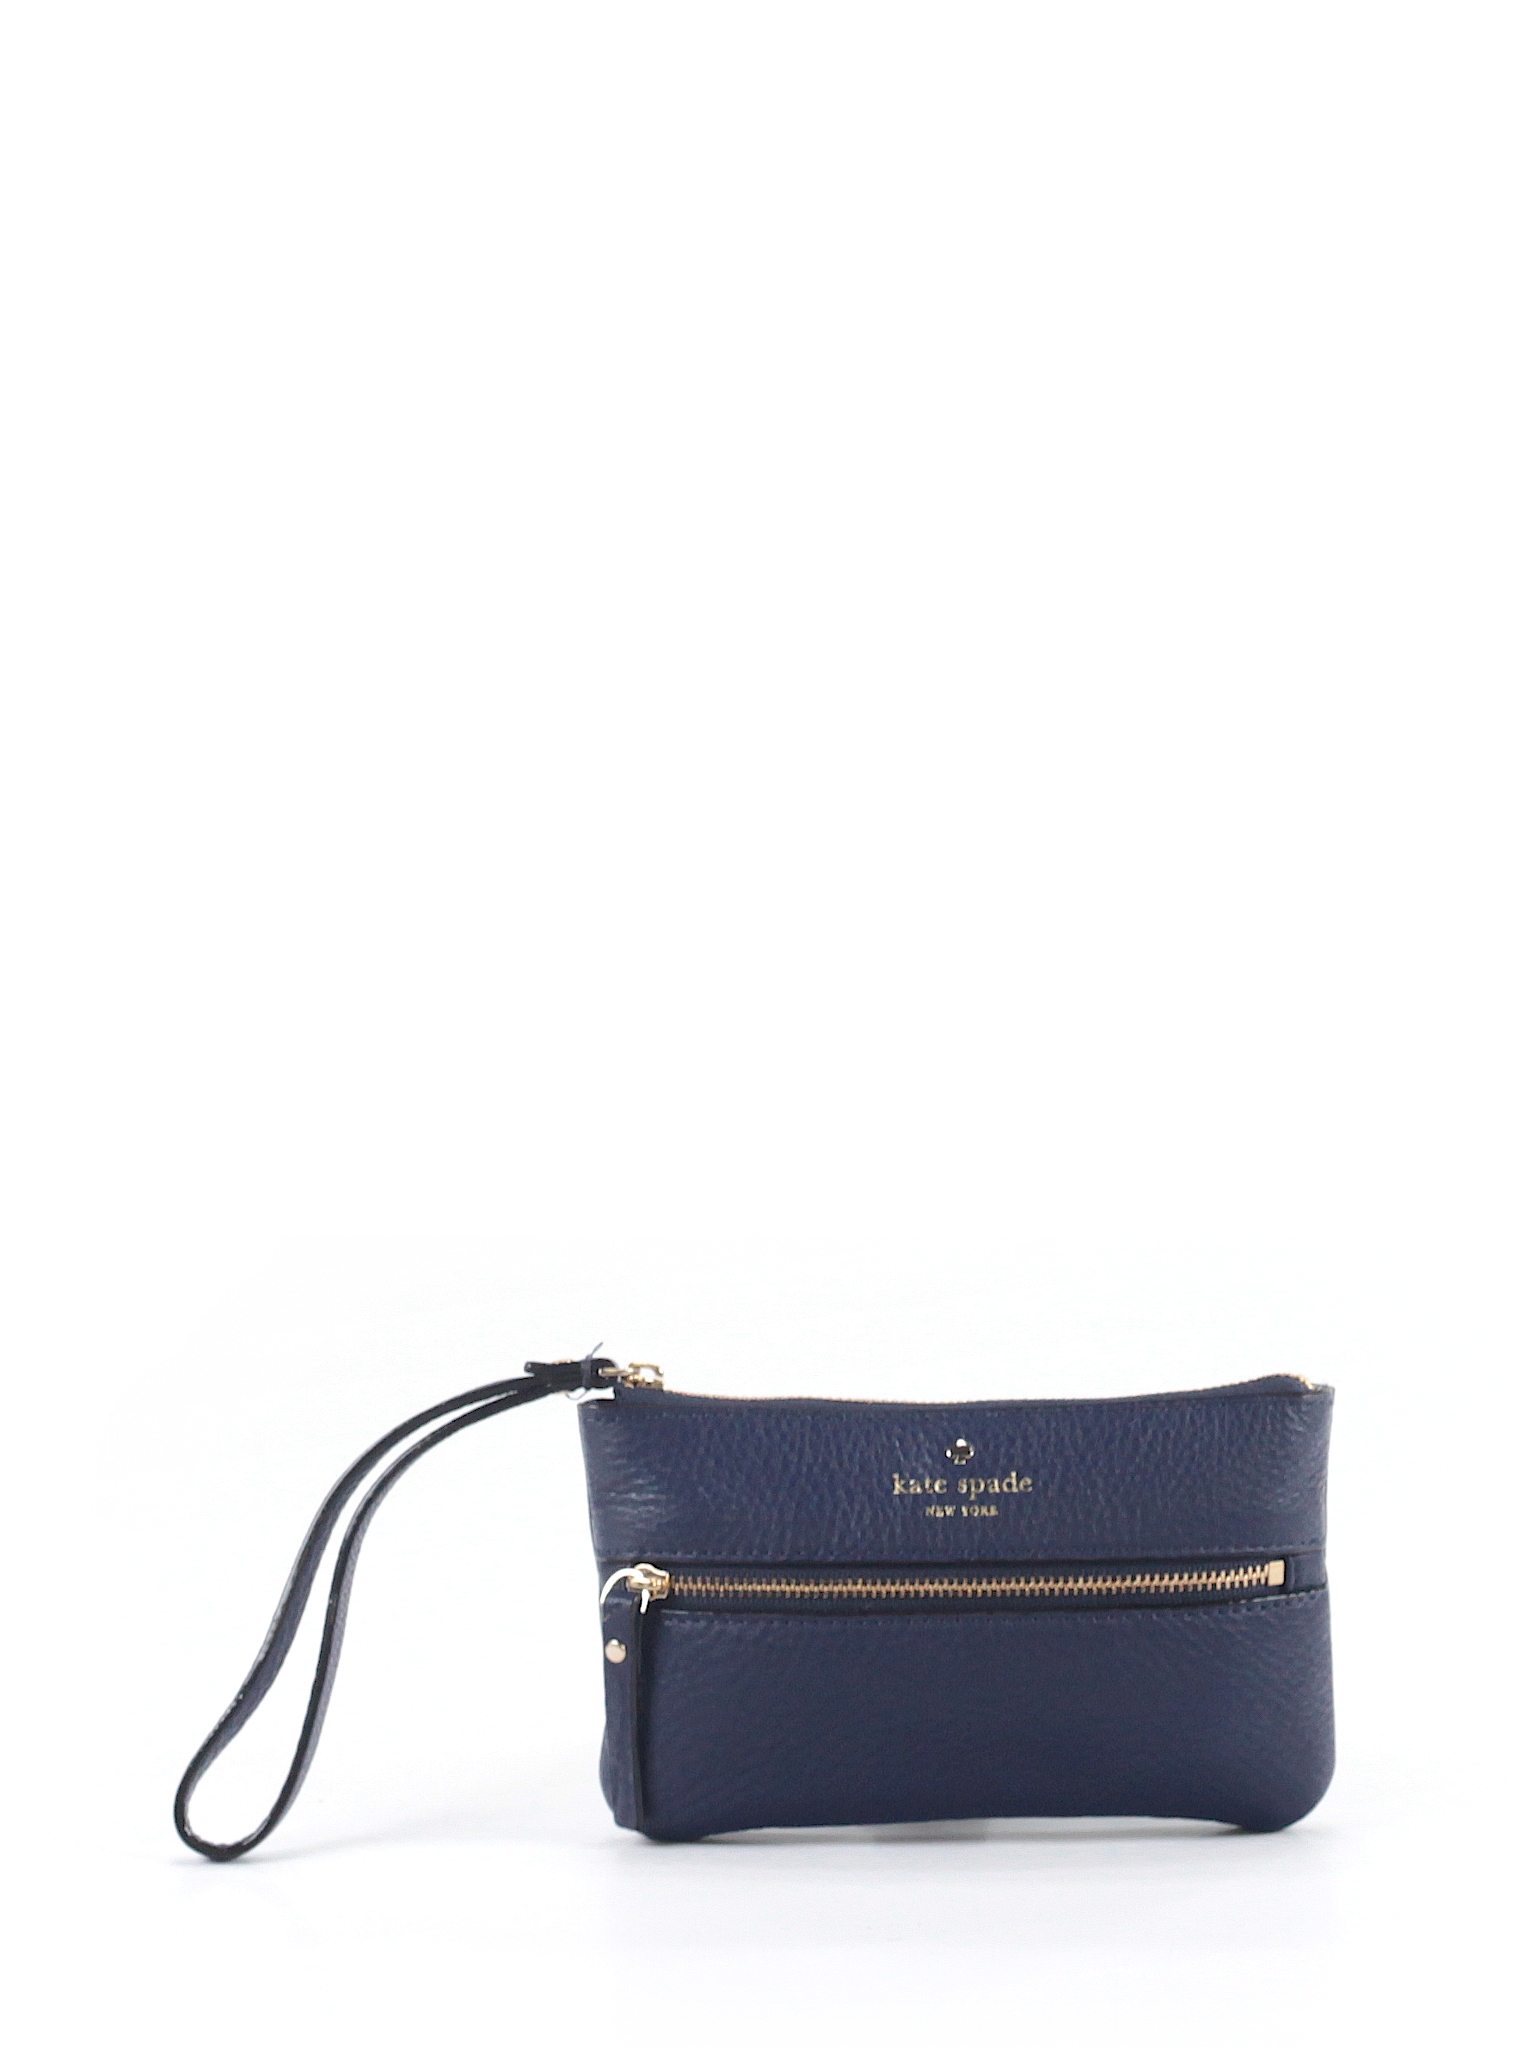 Kate Spade New York 100% Leather Graphic Dark Blue Leather Wristlet One ...